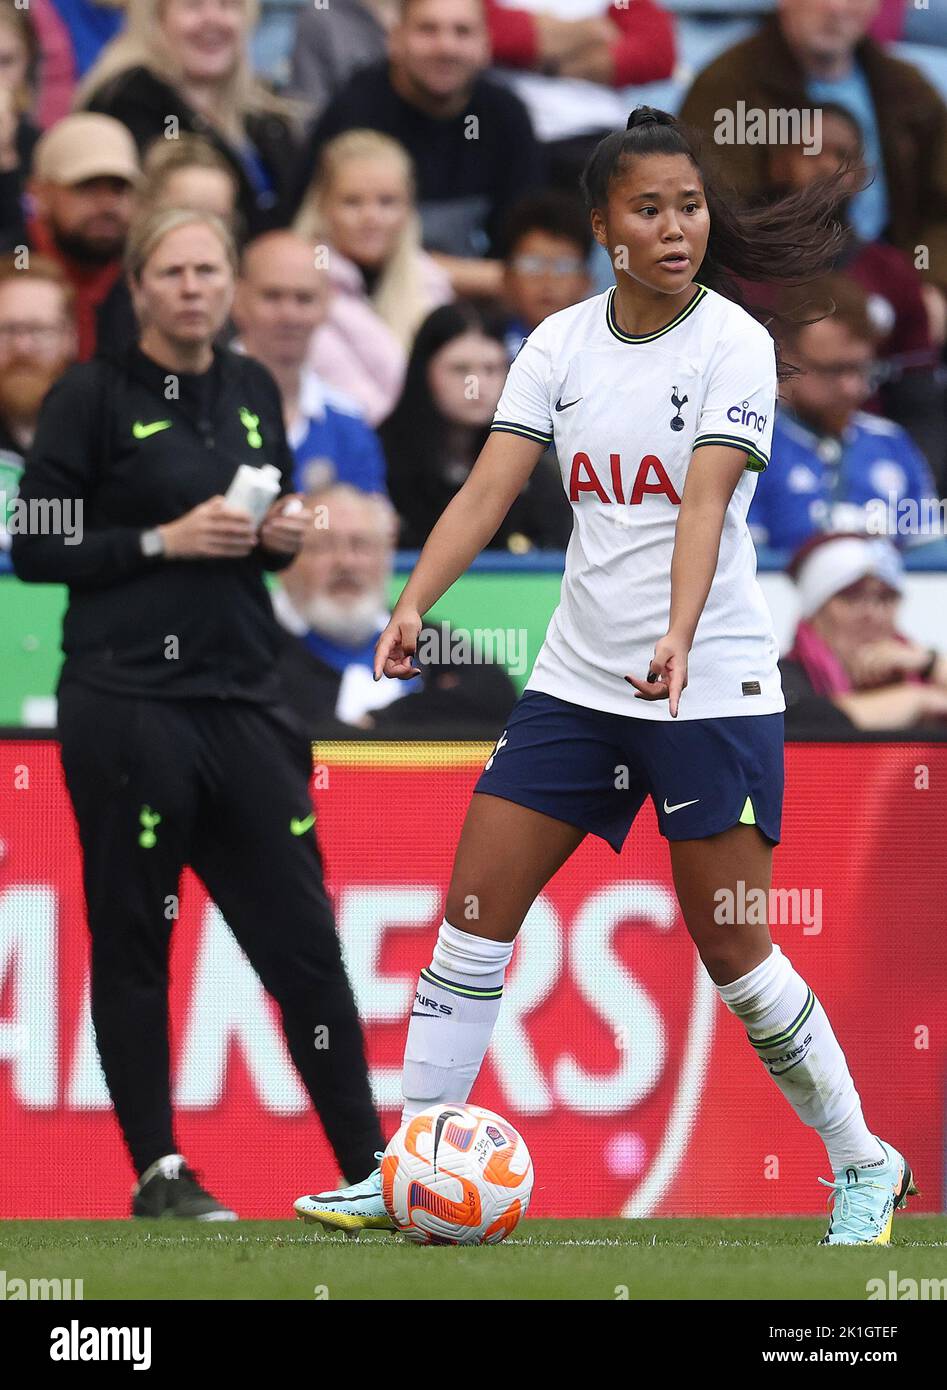 Leicester, UK. 18th September 2022.  Asmita Ale of Tottenham Hotspur during the The FA Women's Super League match at the King Power Stadium, Leicester. Picture credit should read: Darren Staples / Sportimage Credit: Sportimage/Alamy Live News Stock Photo